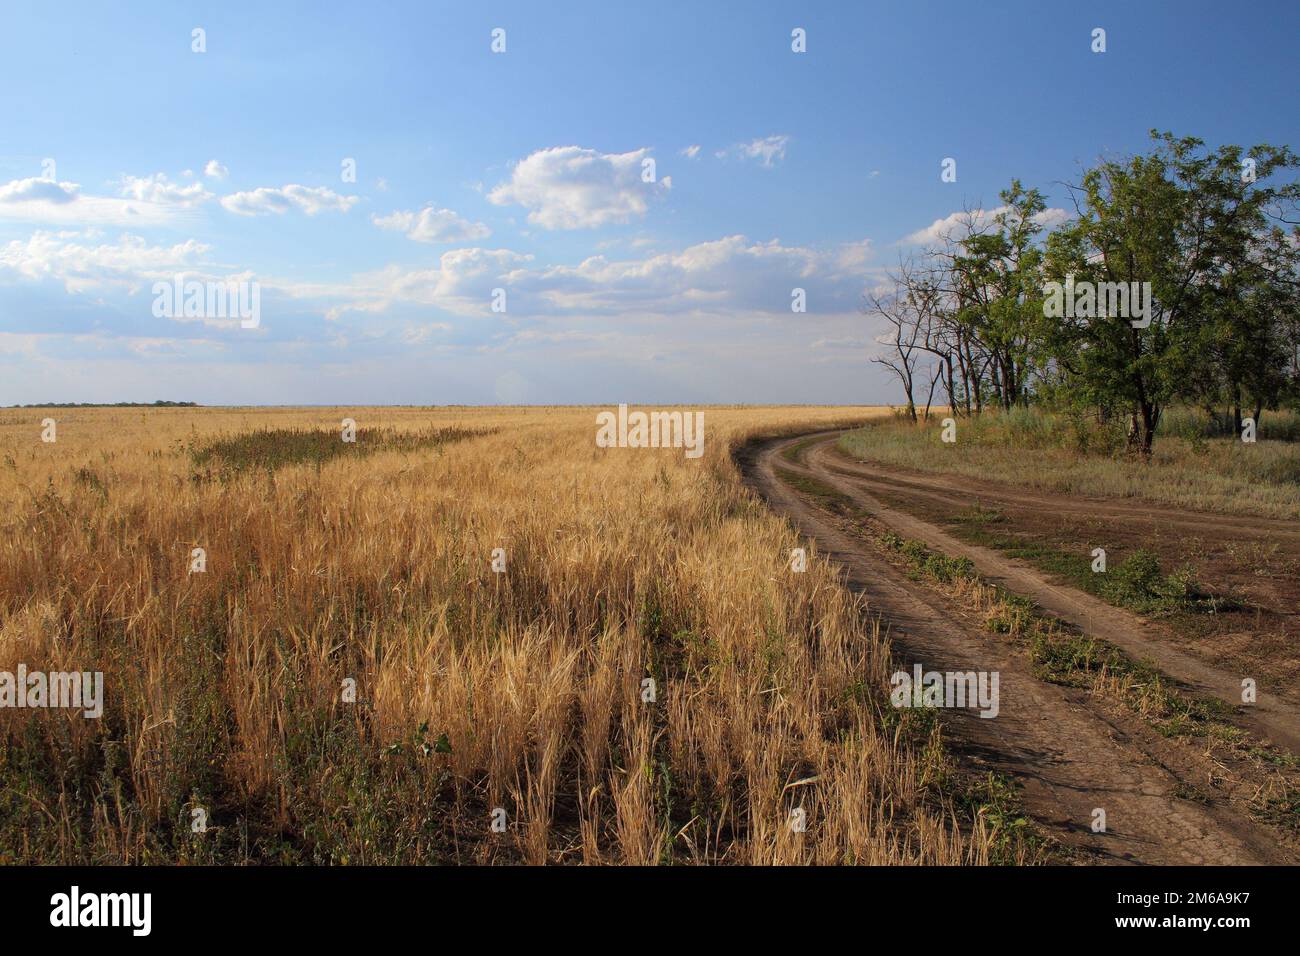 Dirt path along the sloping field Stock Photo